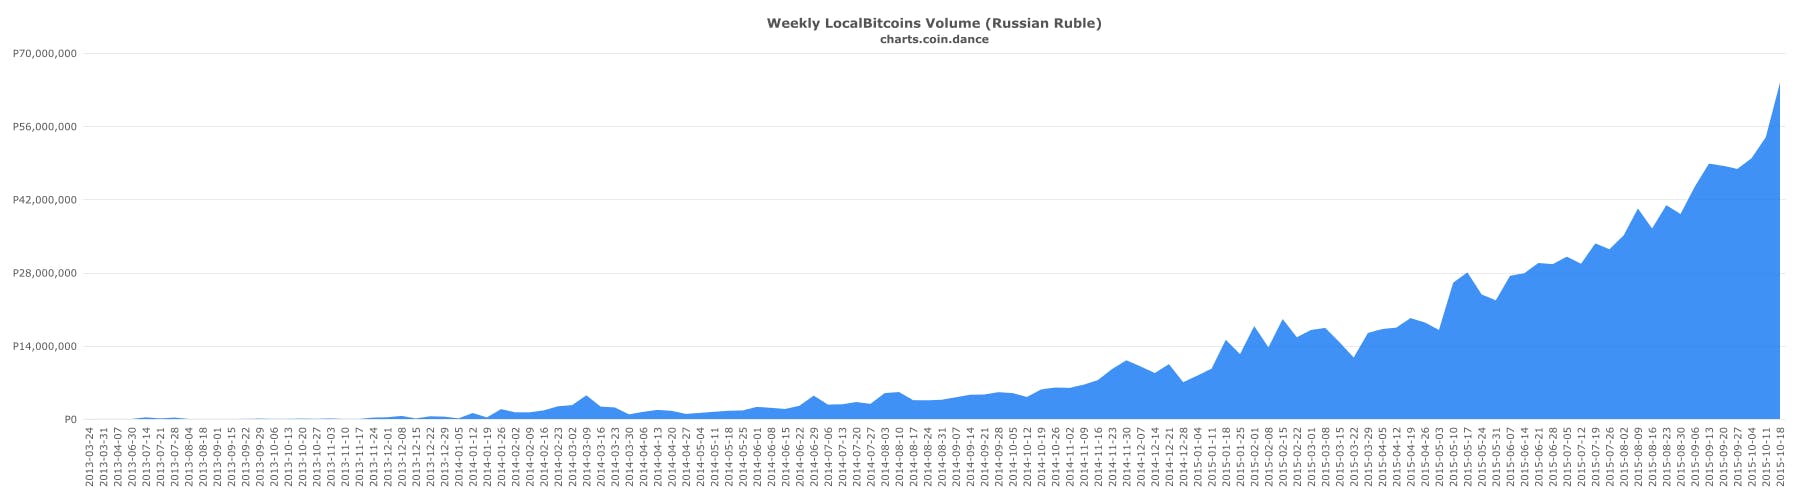 Volume of Russian Rubles on LocalBitcoins